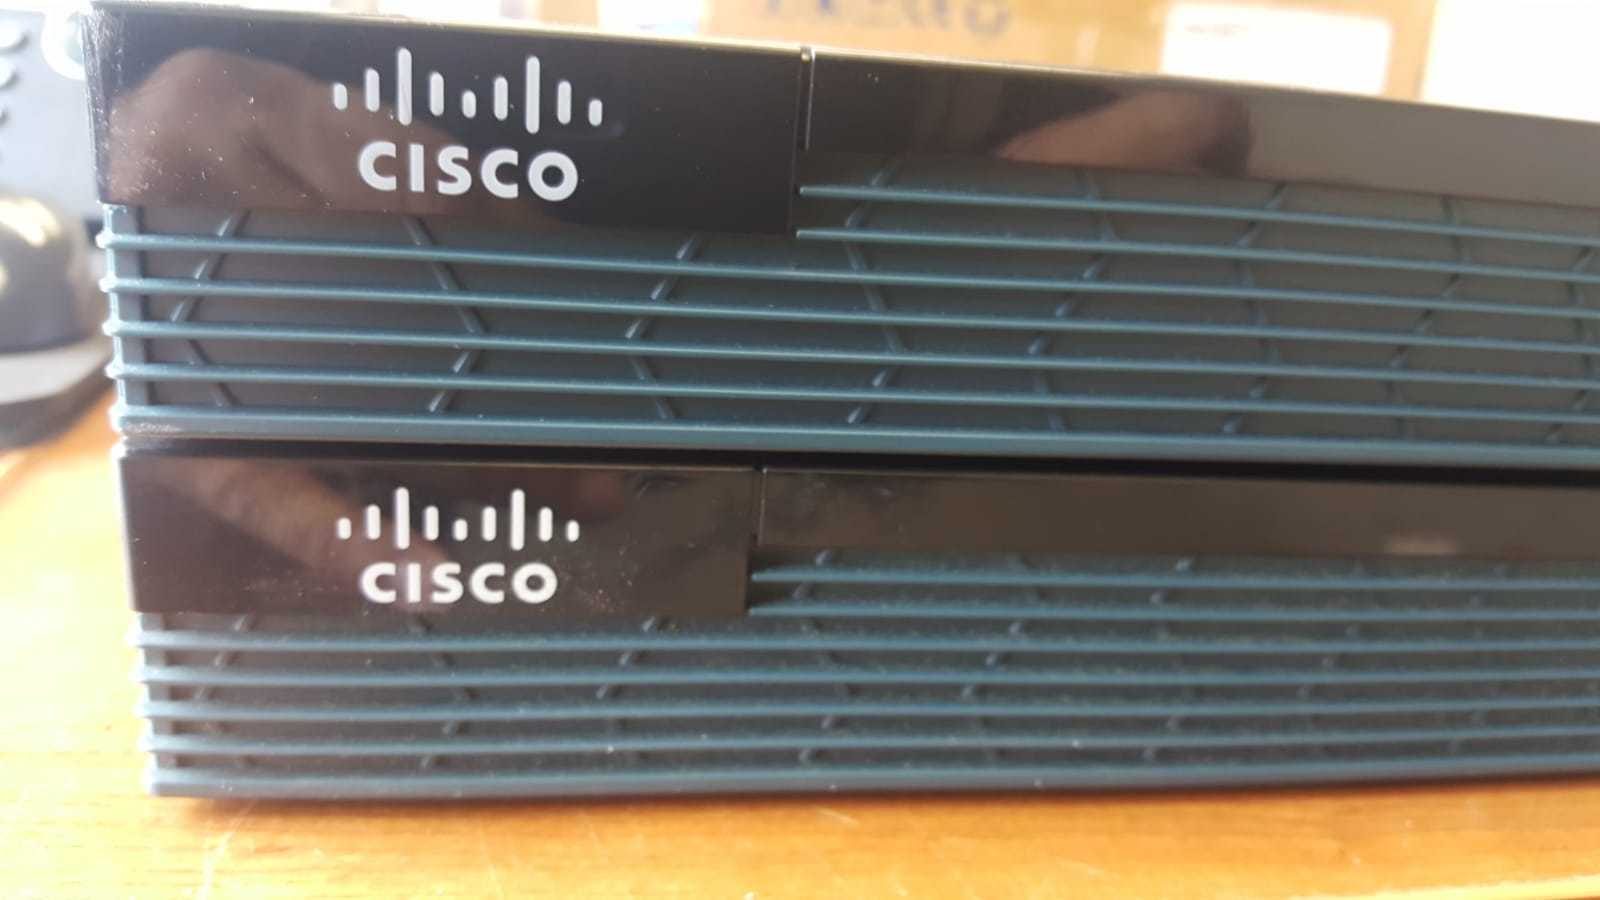 LOT of TWO Cisco 1921 Integrated Services Router Cisco1921/K9